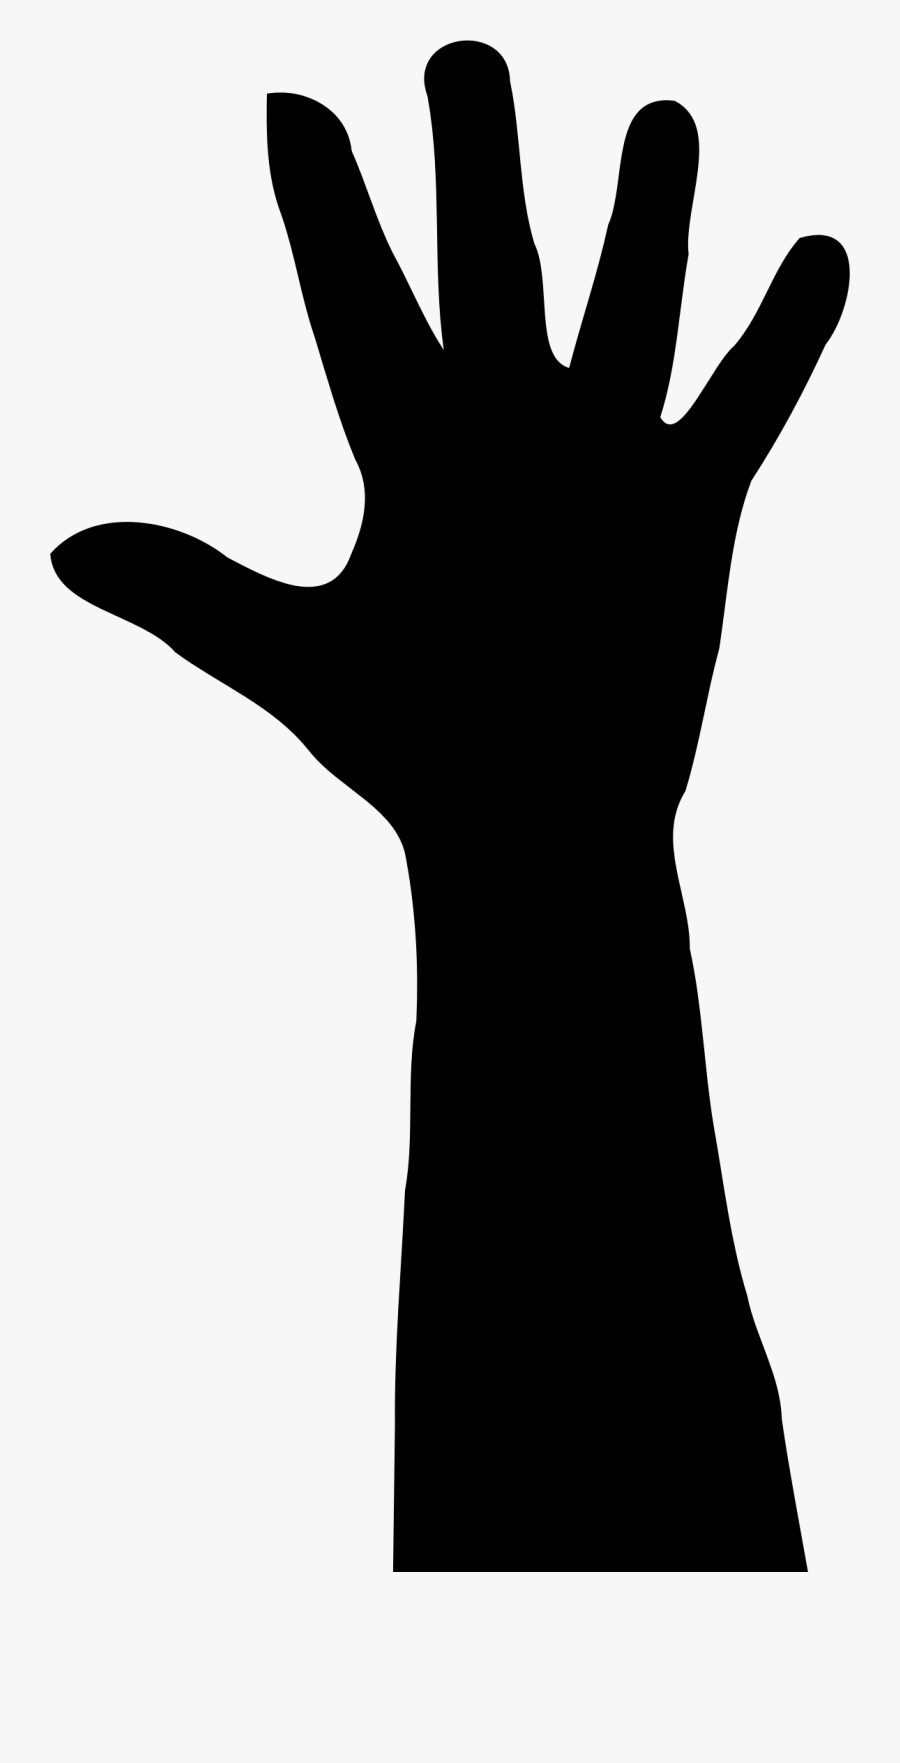 In Silhouette Big Image - Raised Hand Clipart, Transparent Clipart